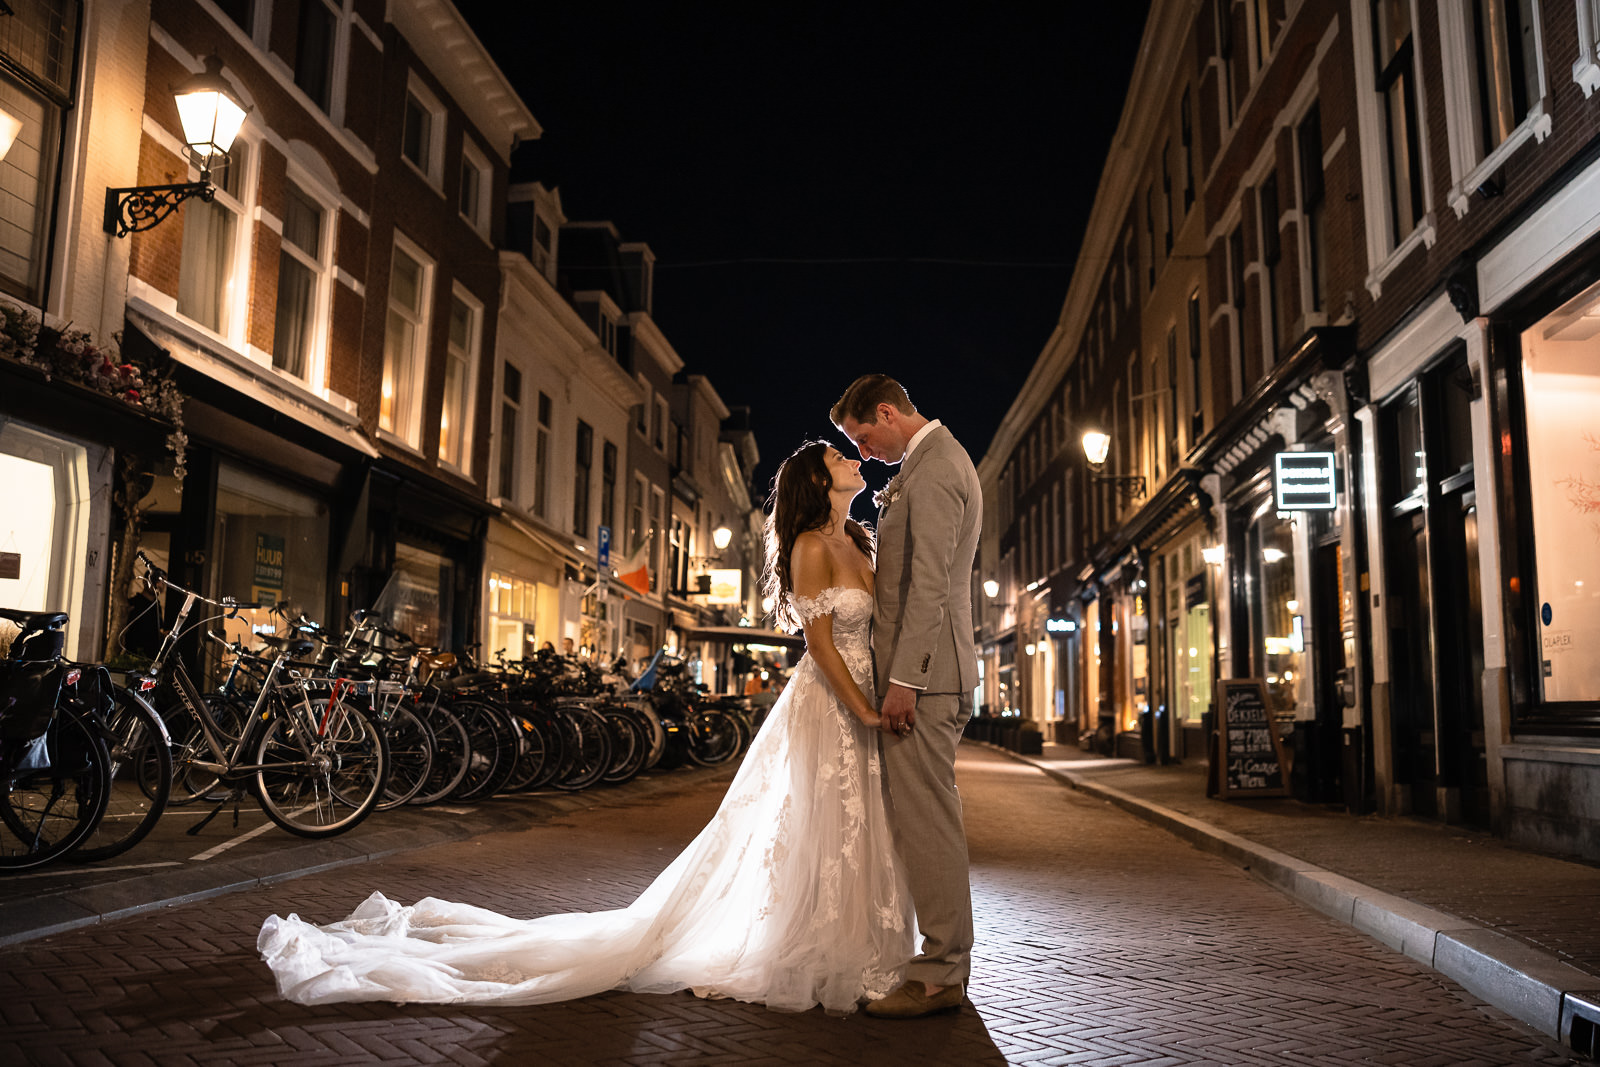 Bride and groom creative evening photo at denneweg the Hague